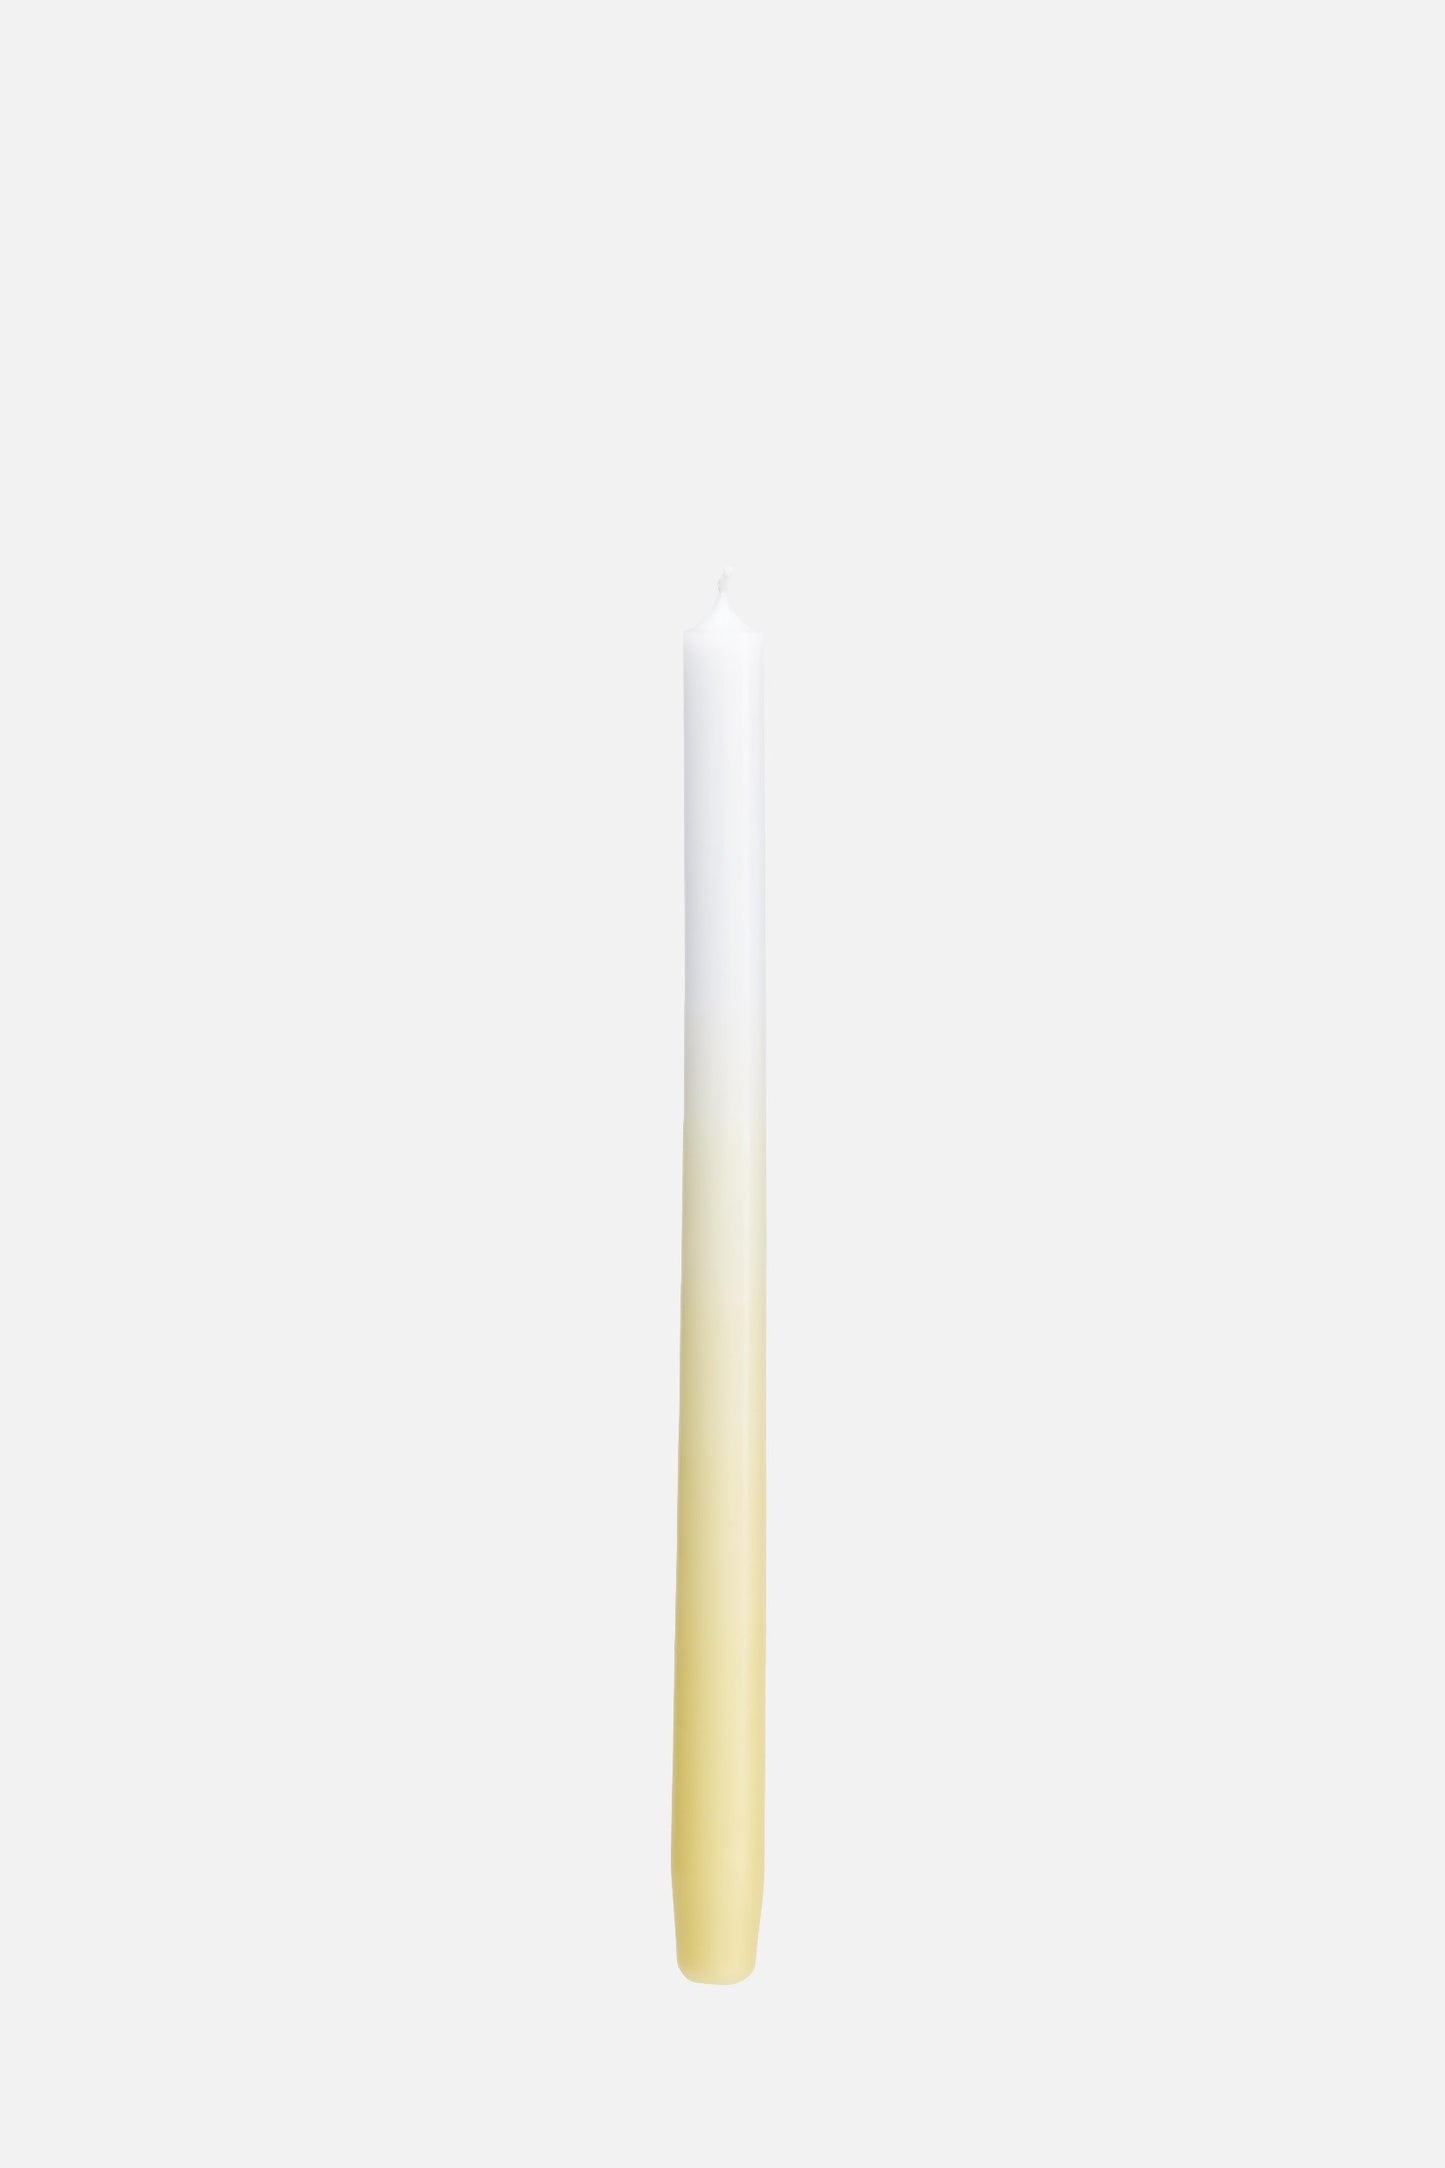 GRADIENT CANDLES | CANARY YELLOW